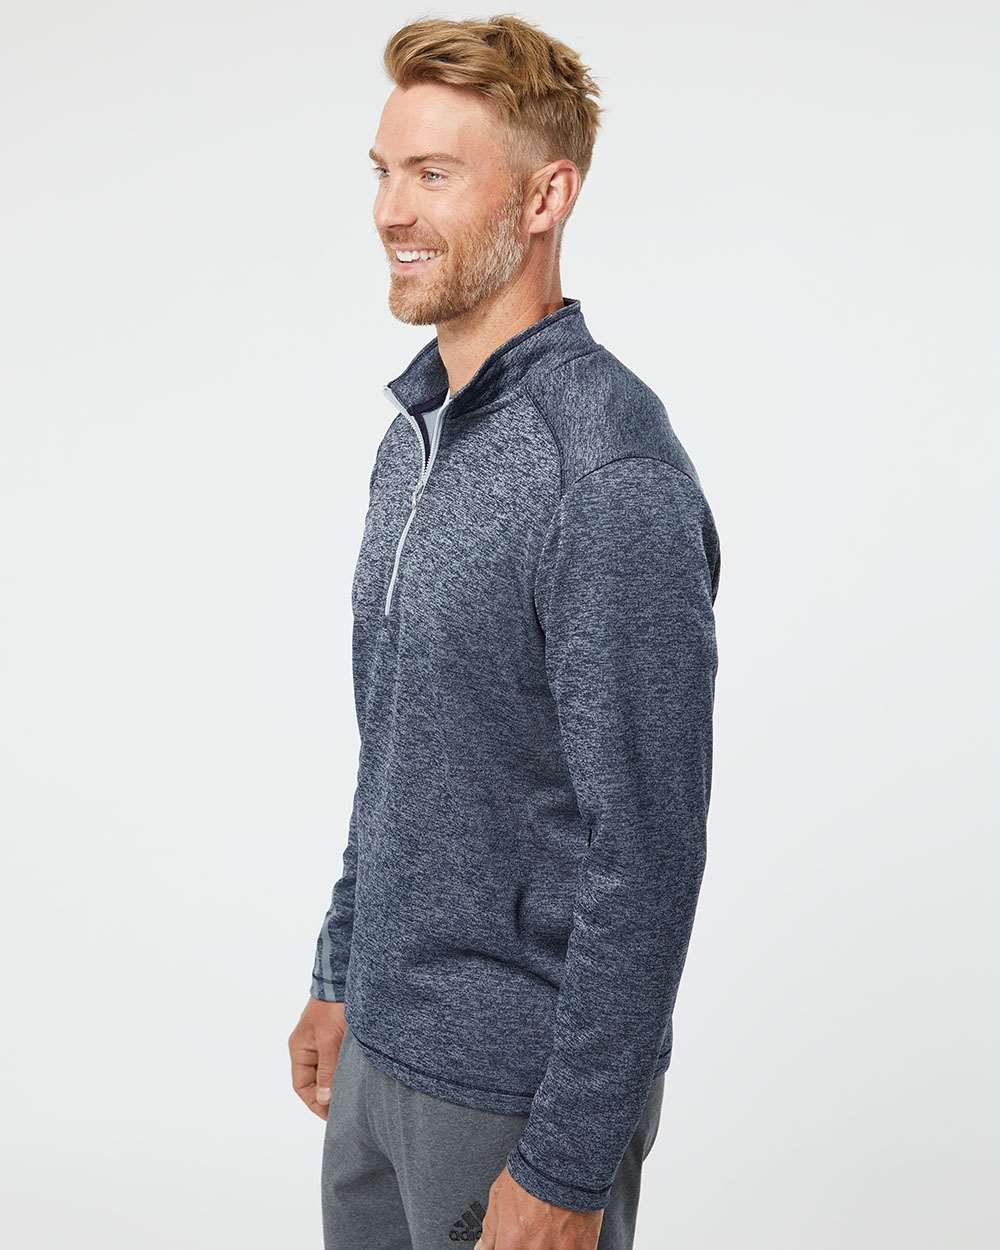 Adidas A284 Brushed Terry Heathered Quarter-Zip Pullover #colormdl_Navy Heather/ Mid Grey